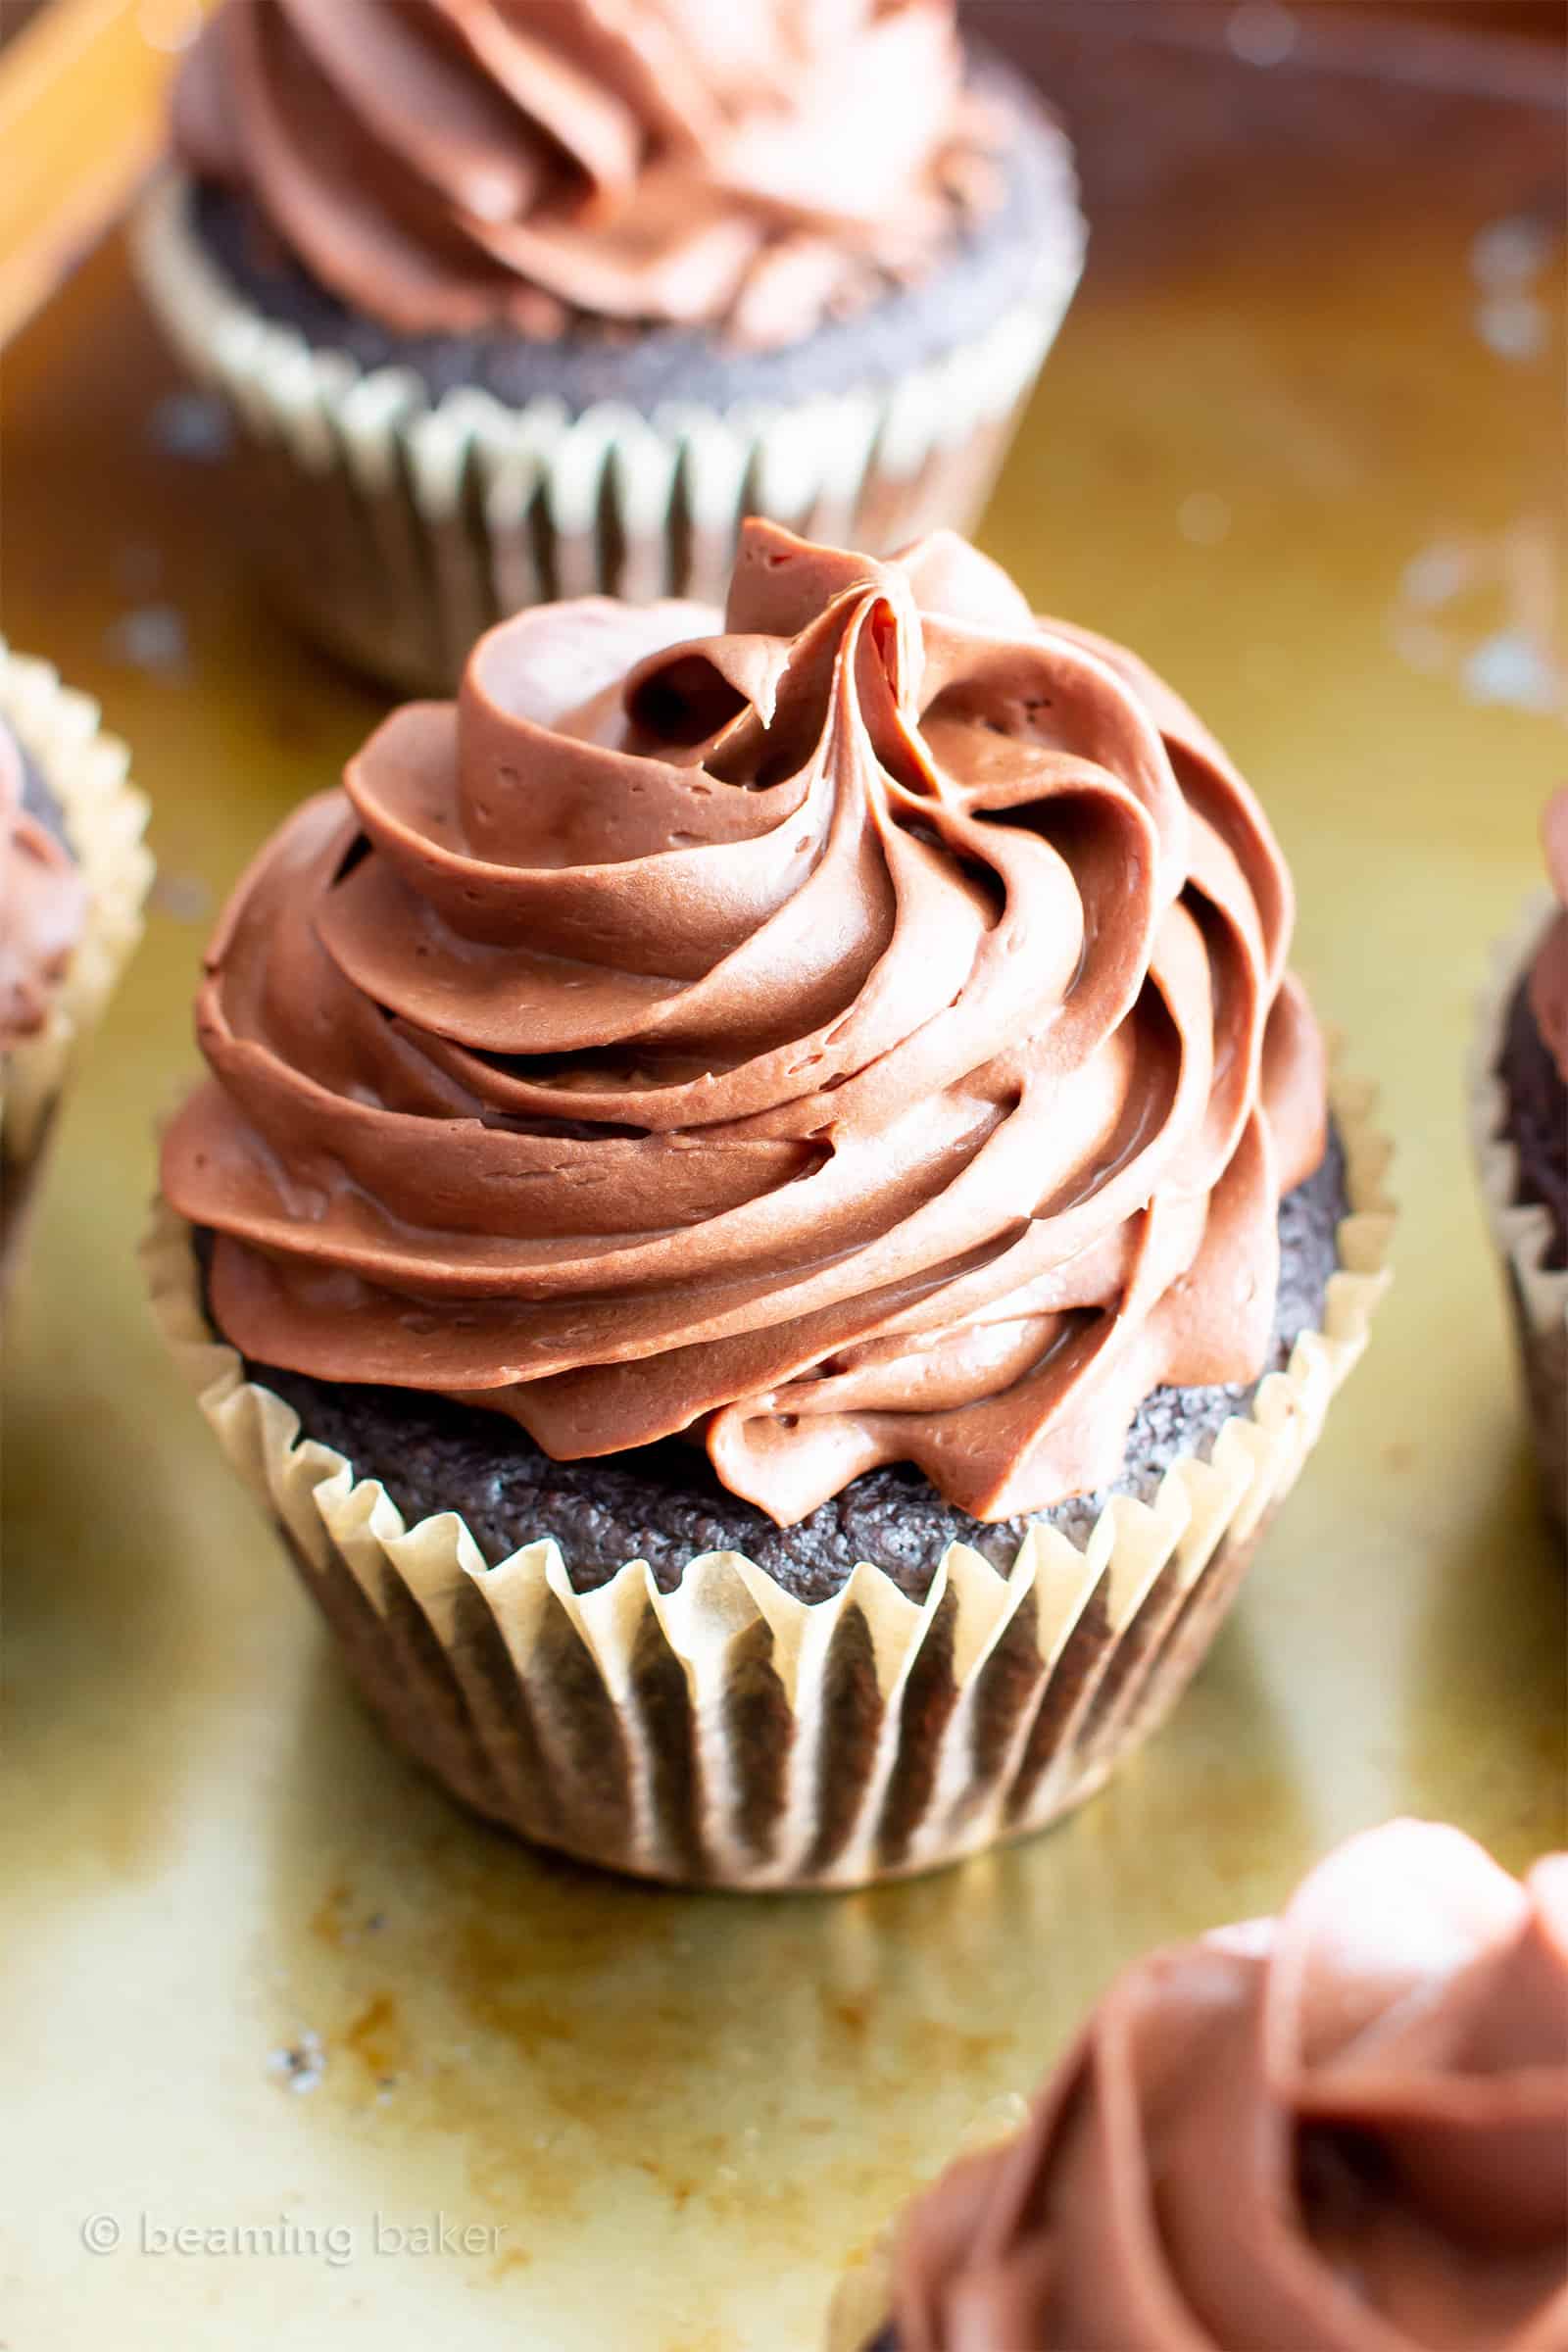 Paleo Chocolate Cupcakes Recipe (Almond Flour, GF): rich ‘n moist vegan gluten free cupcakes topped with creamy chocolate frosting! The best paleo cupcakes—made with gluten free, dairy free, healthy ingredients! #Vegan #Paleo #Cupcakes #GlutenFree #DairyFree | Recipe at BeamingBaker.com